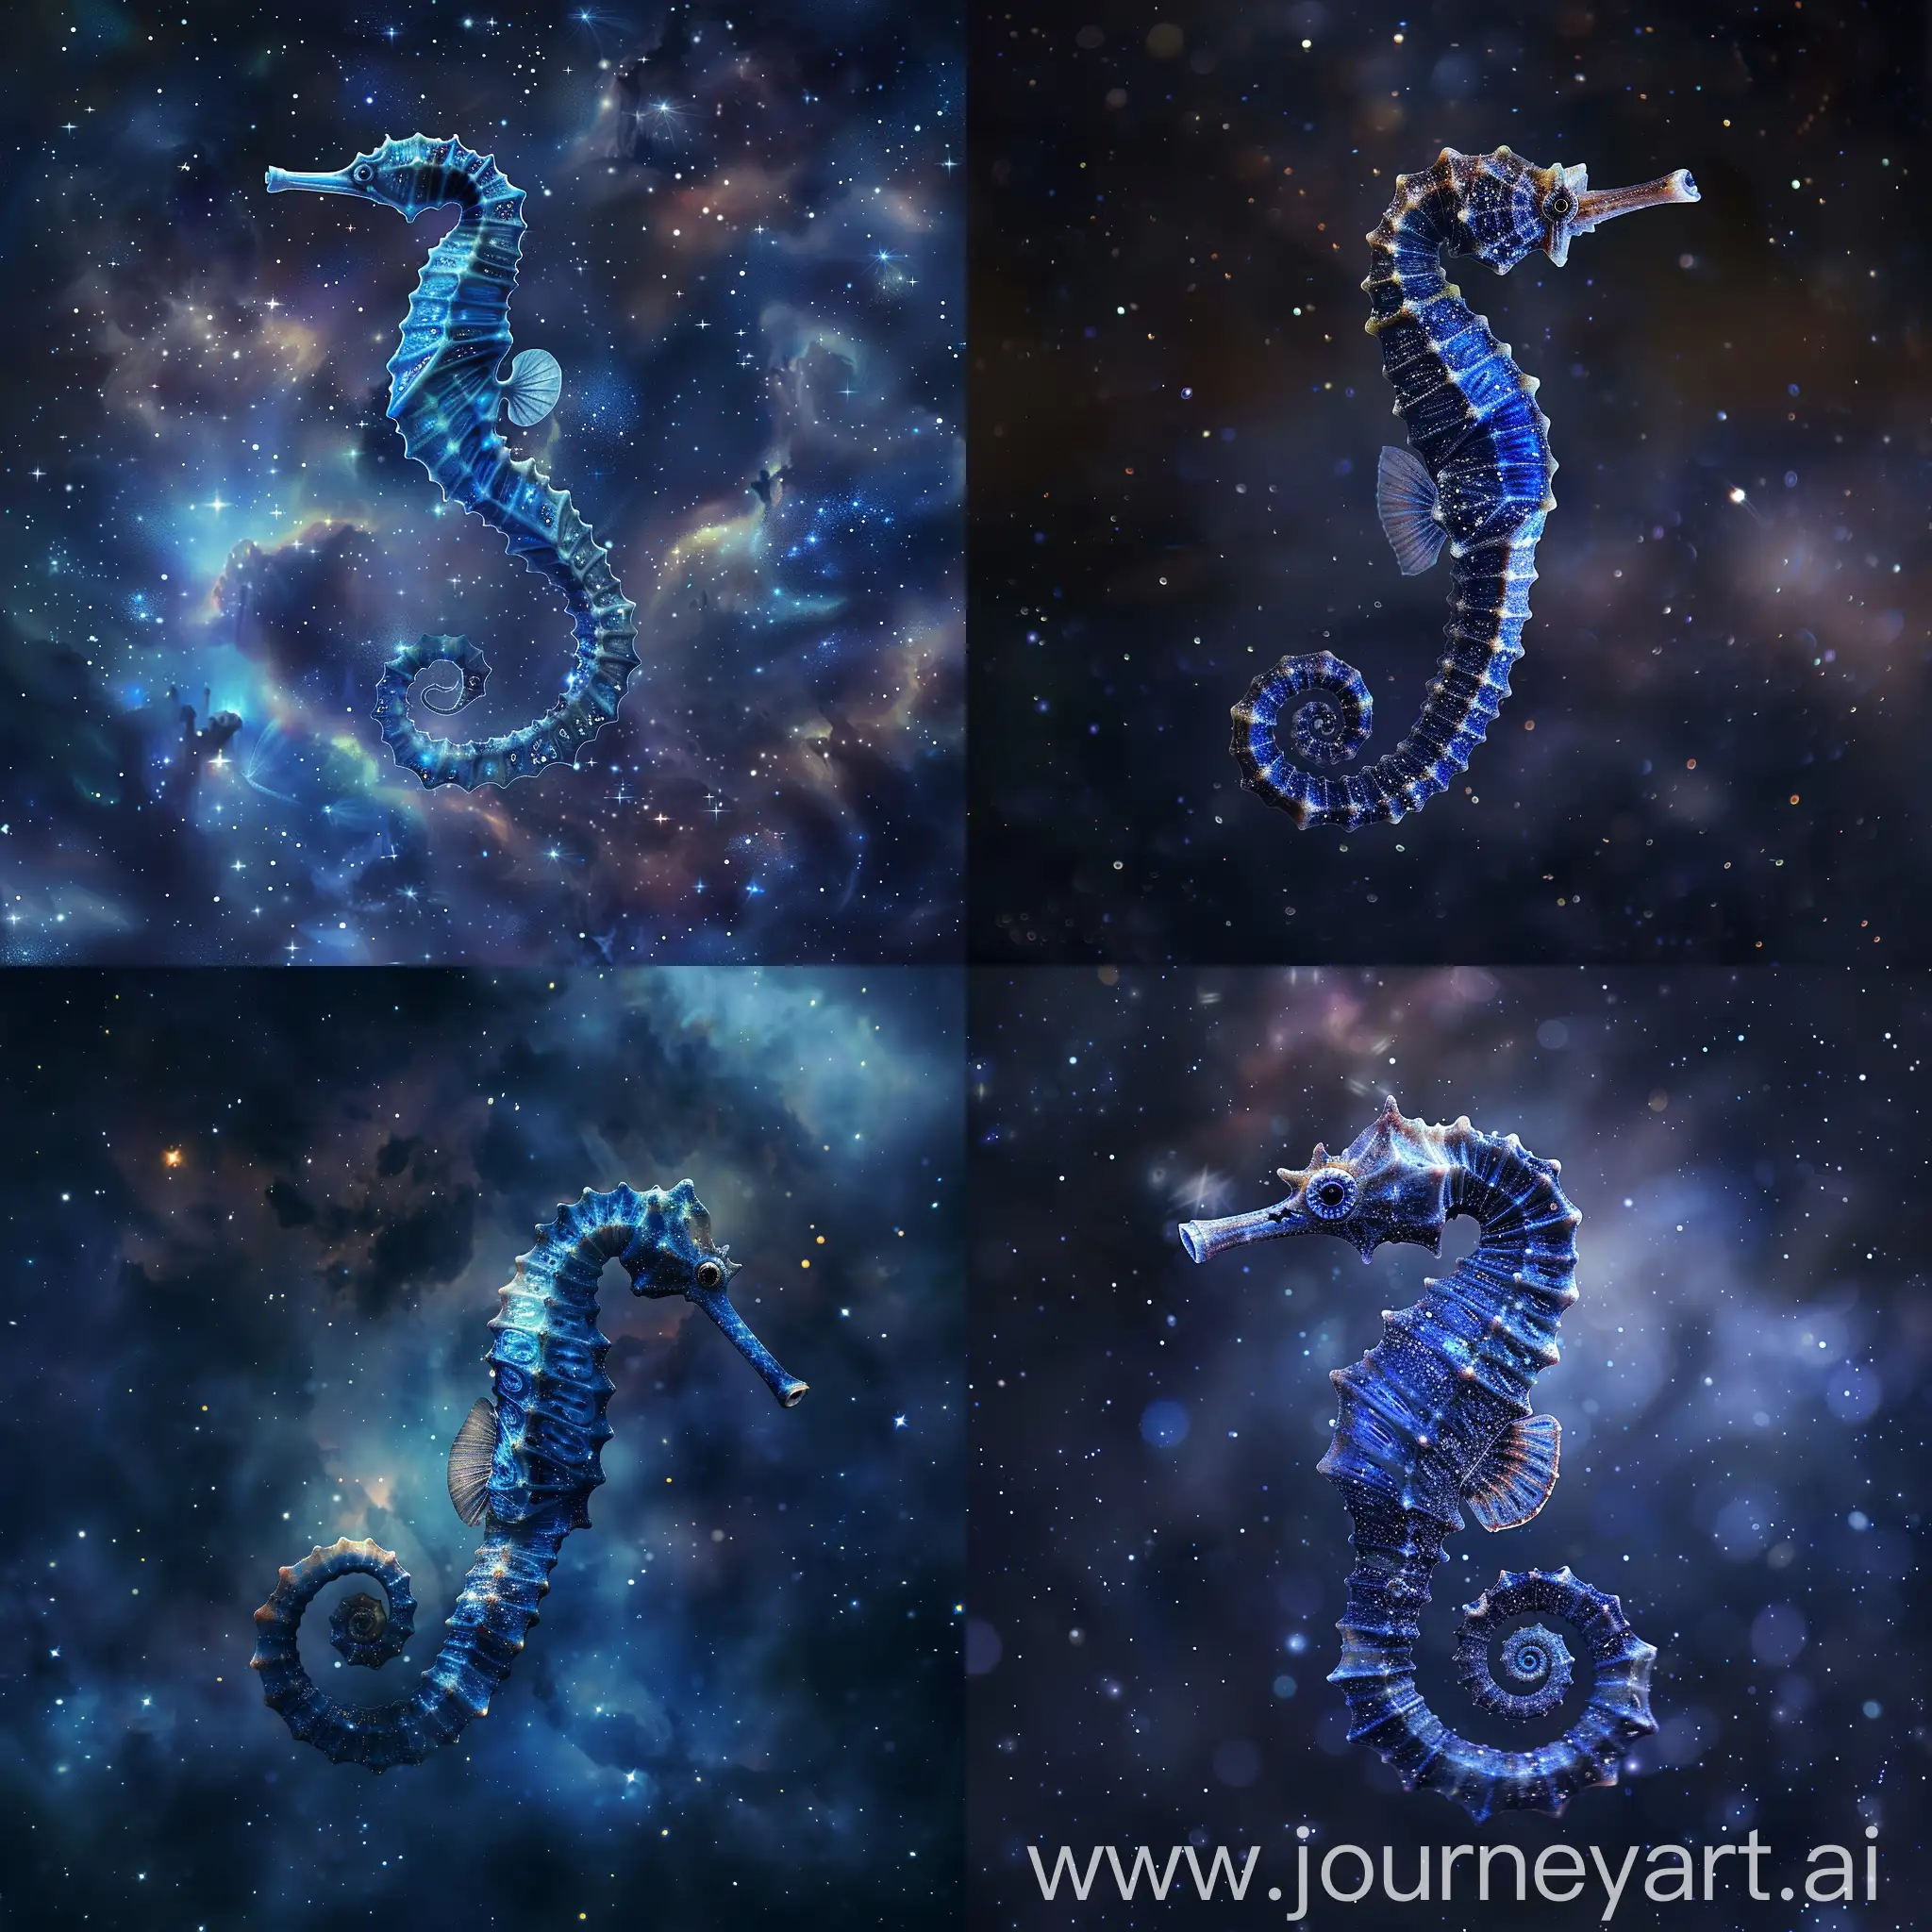 Dreamy-Blue-Seahorse-Floating-in-Starry-Sky